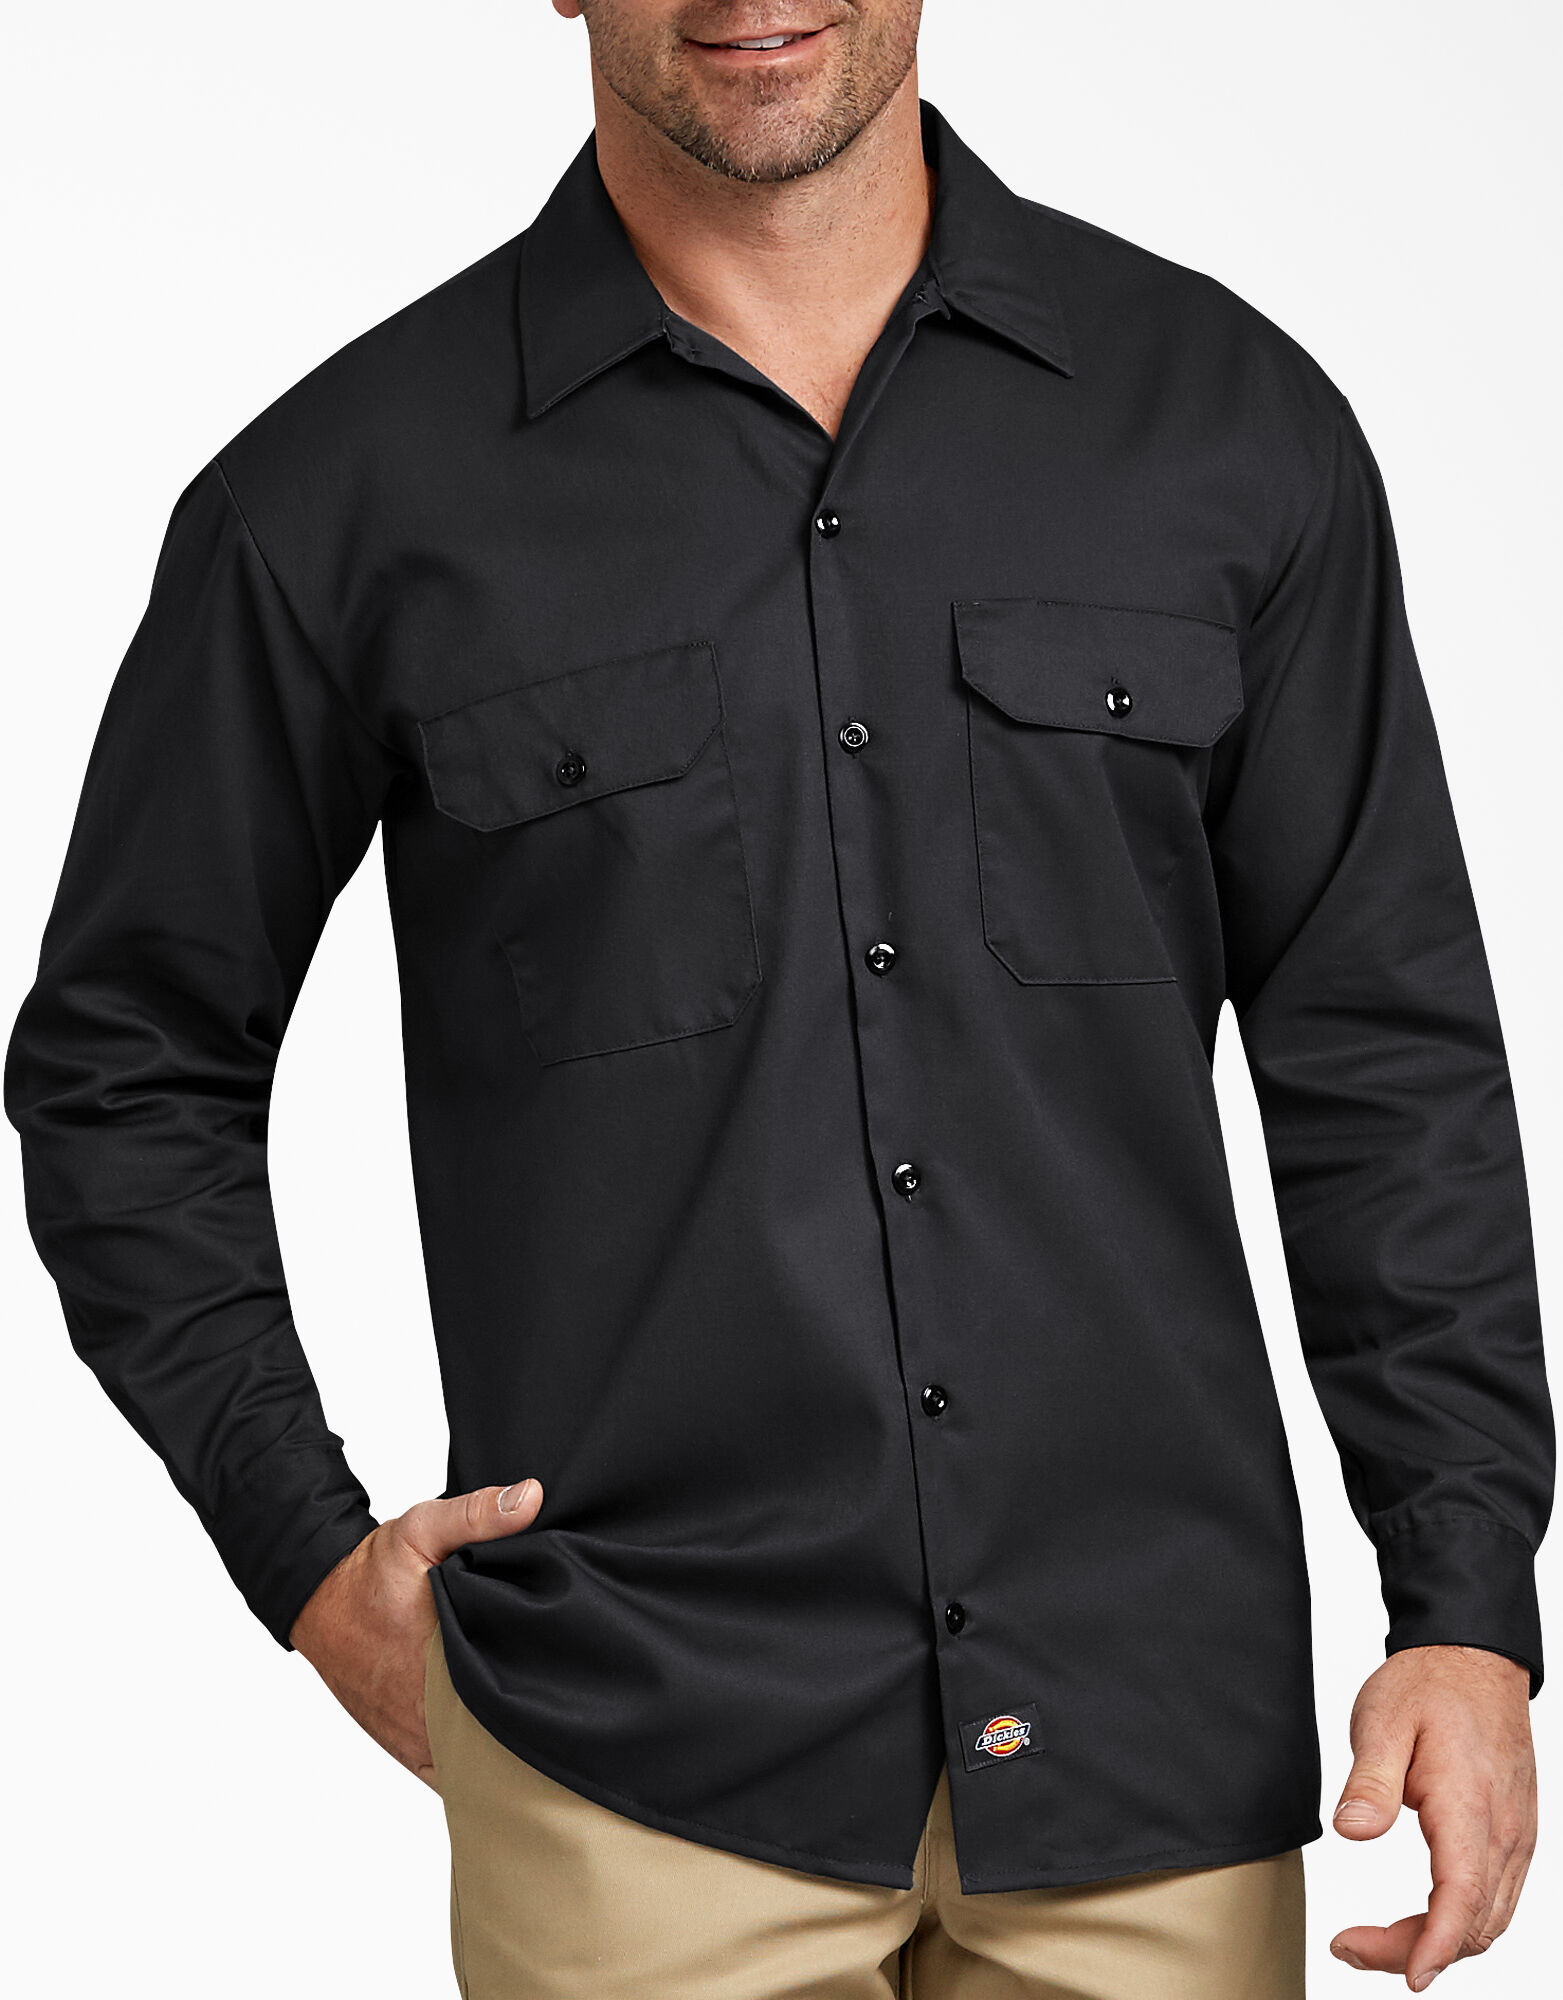 Dickies Boys' Twill Shirt, Black Size xs  4 years old